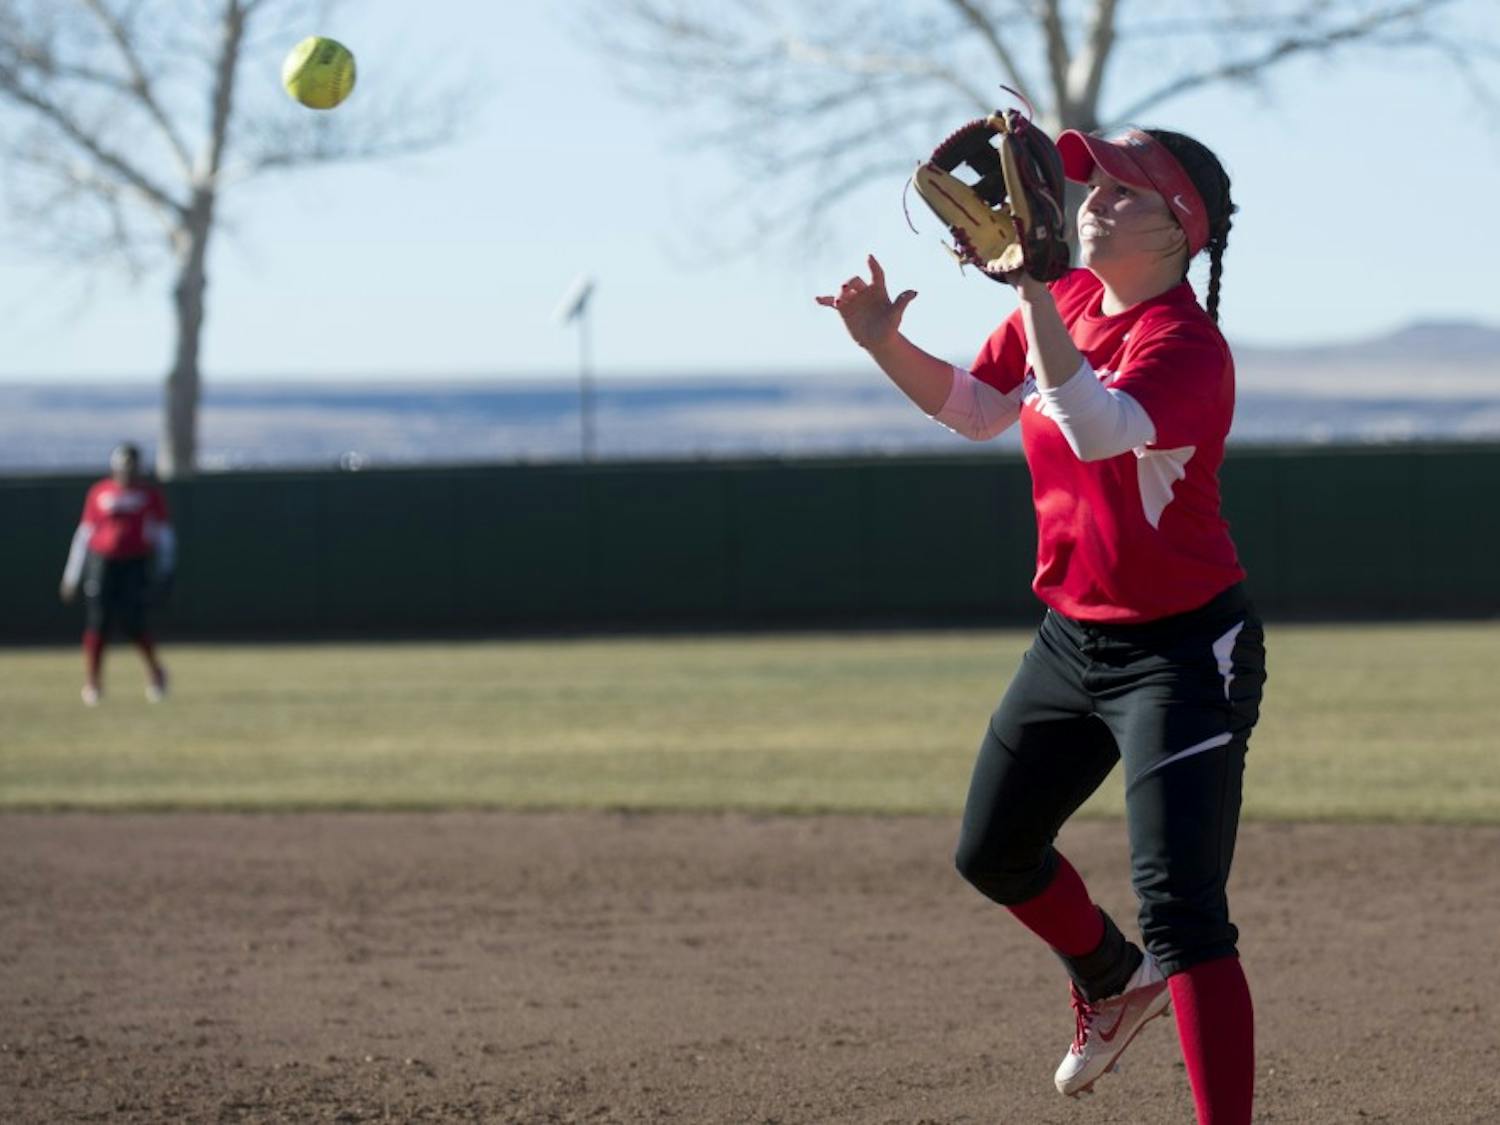 Junior Shelbie Franc makes a play during the Lobos first practice Feb. 8, 2016 at the Lobo Softball Field. The Lobos will play their first home game this Saturday against Northern Colorado at 1 p.m.